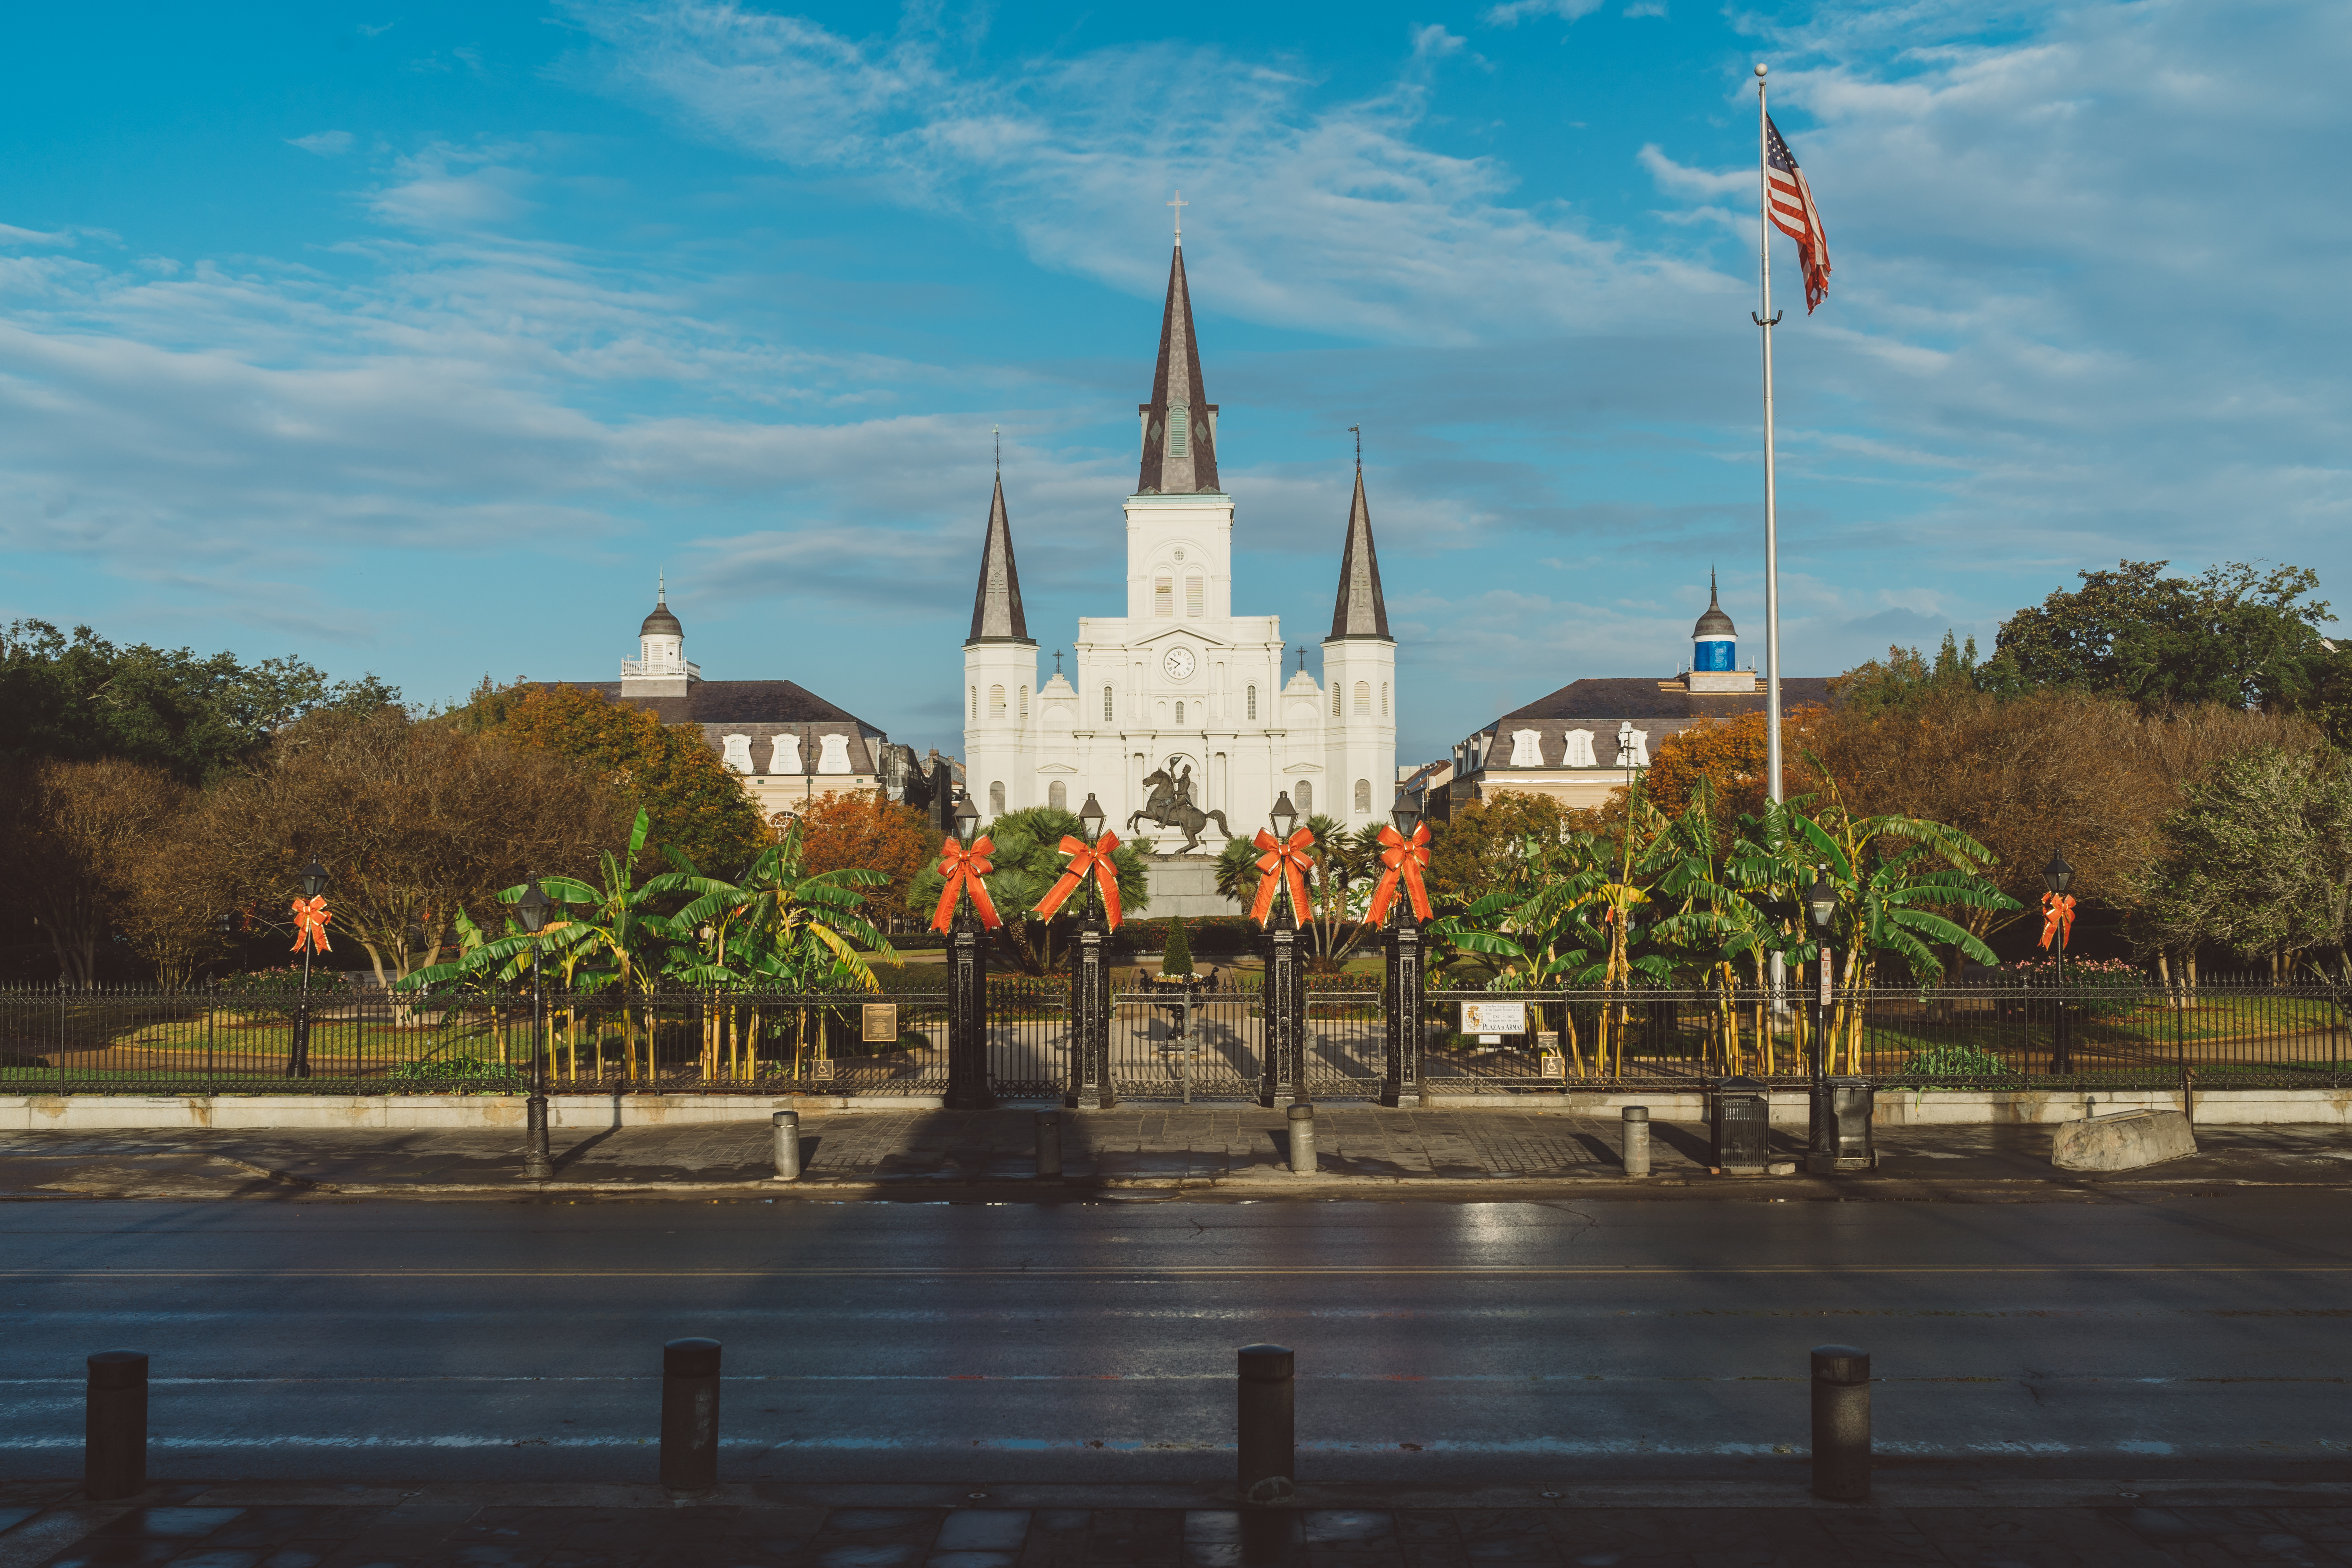 Moving to New Orleans? Here Are 15 Things to Know